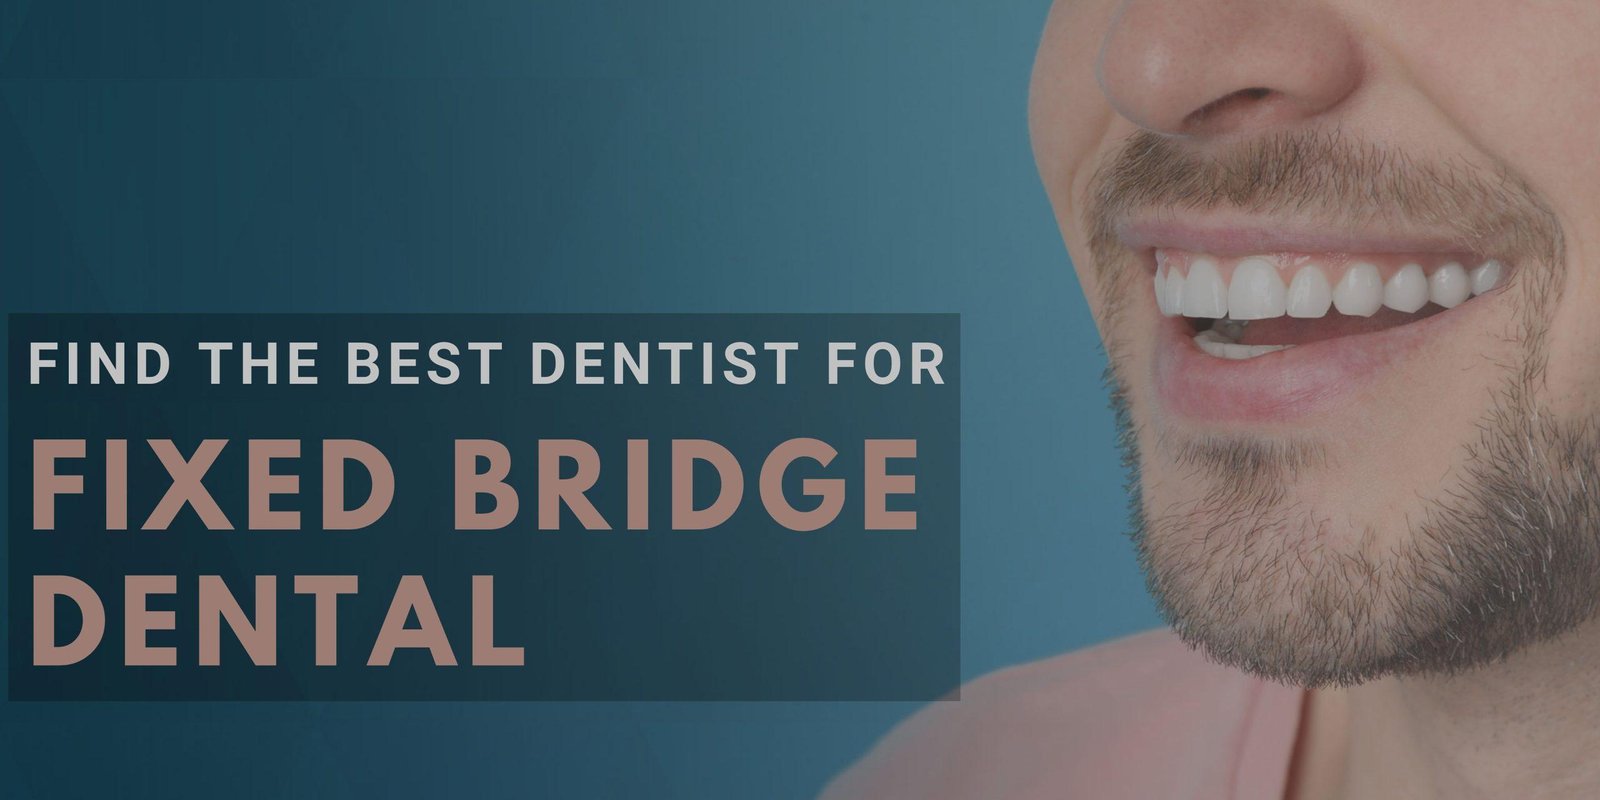 How to Find a Good Dentist for Fixed Bridge Dental